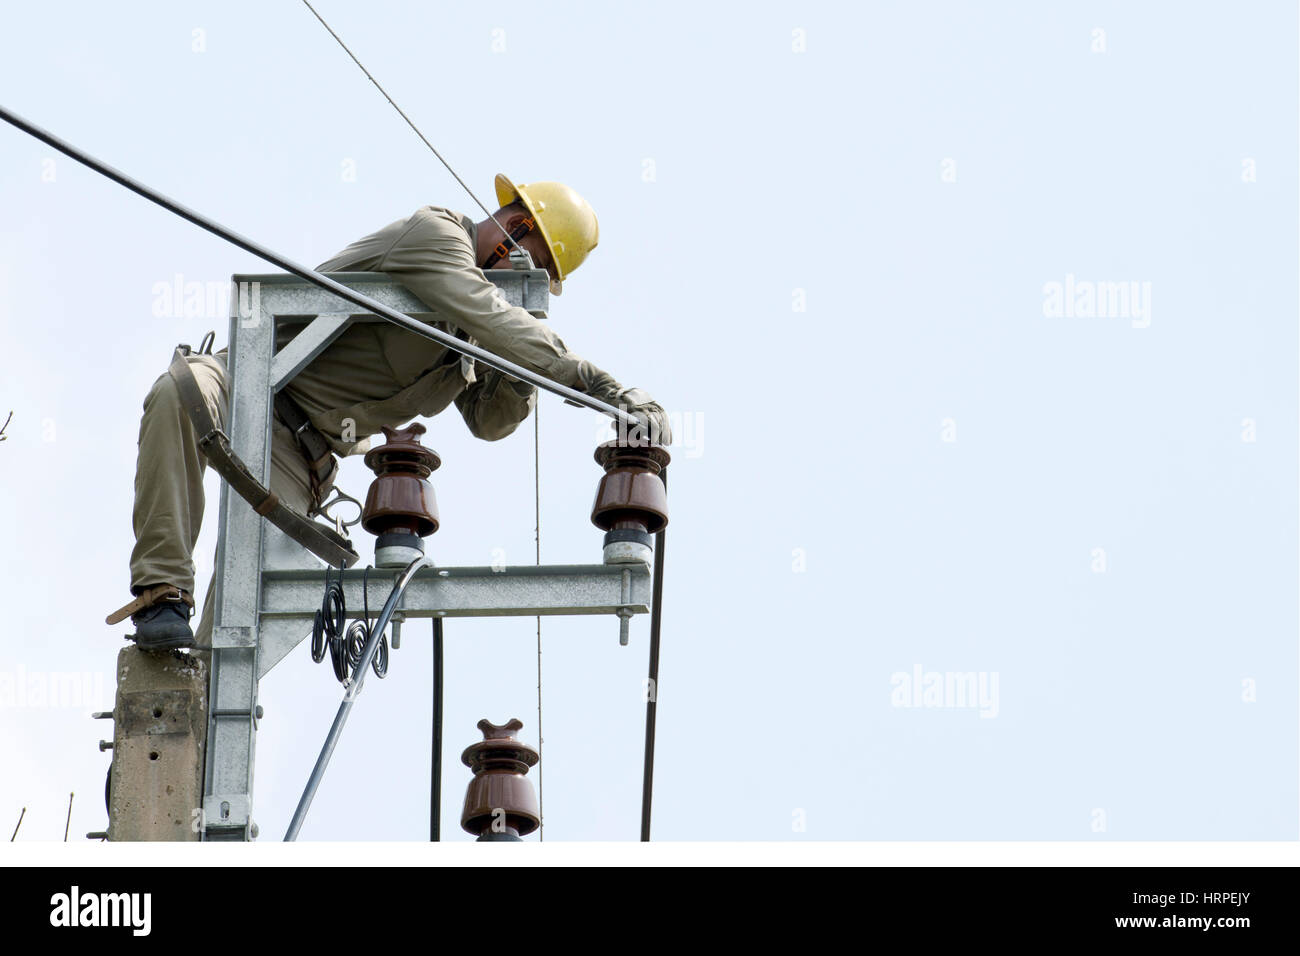 Electrician lineman at climbing work on electrical post power pole